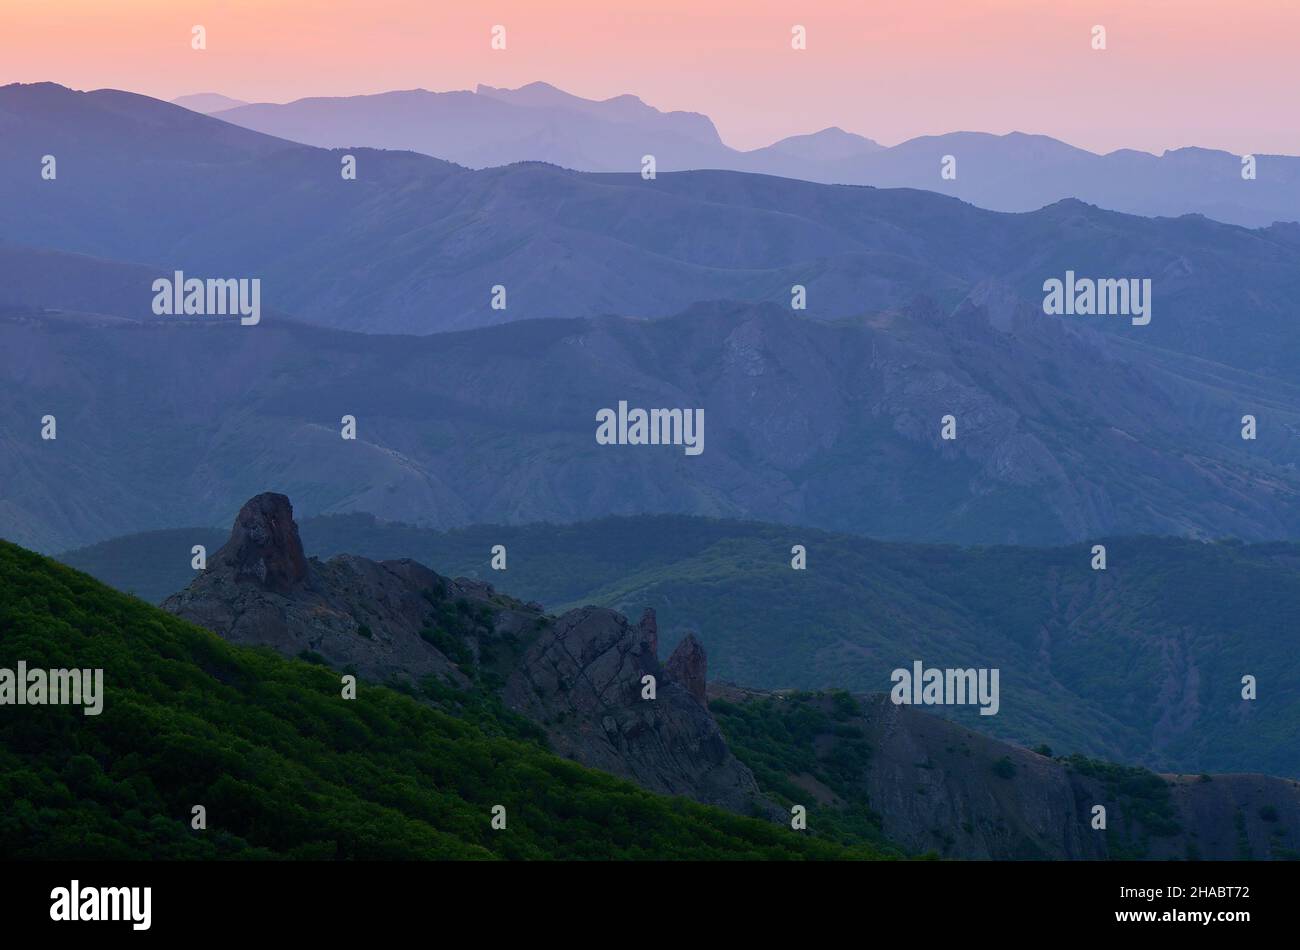 Silhouette of the mountain ranges at dawn Stock Photo